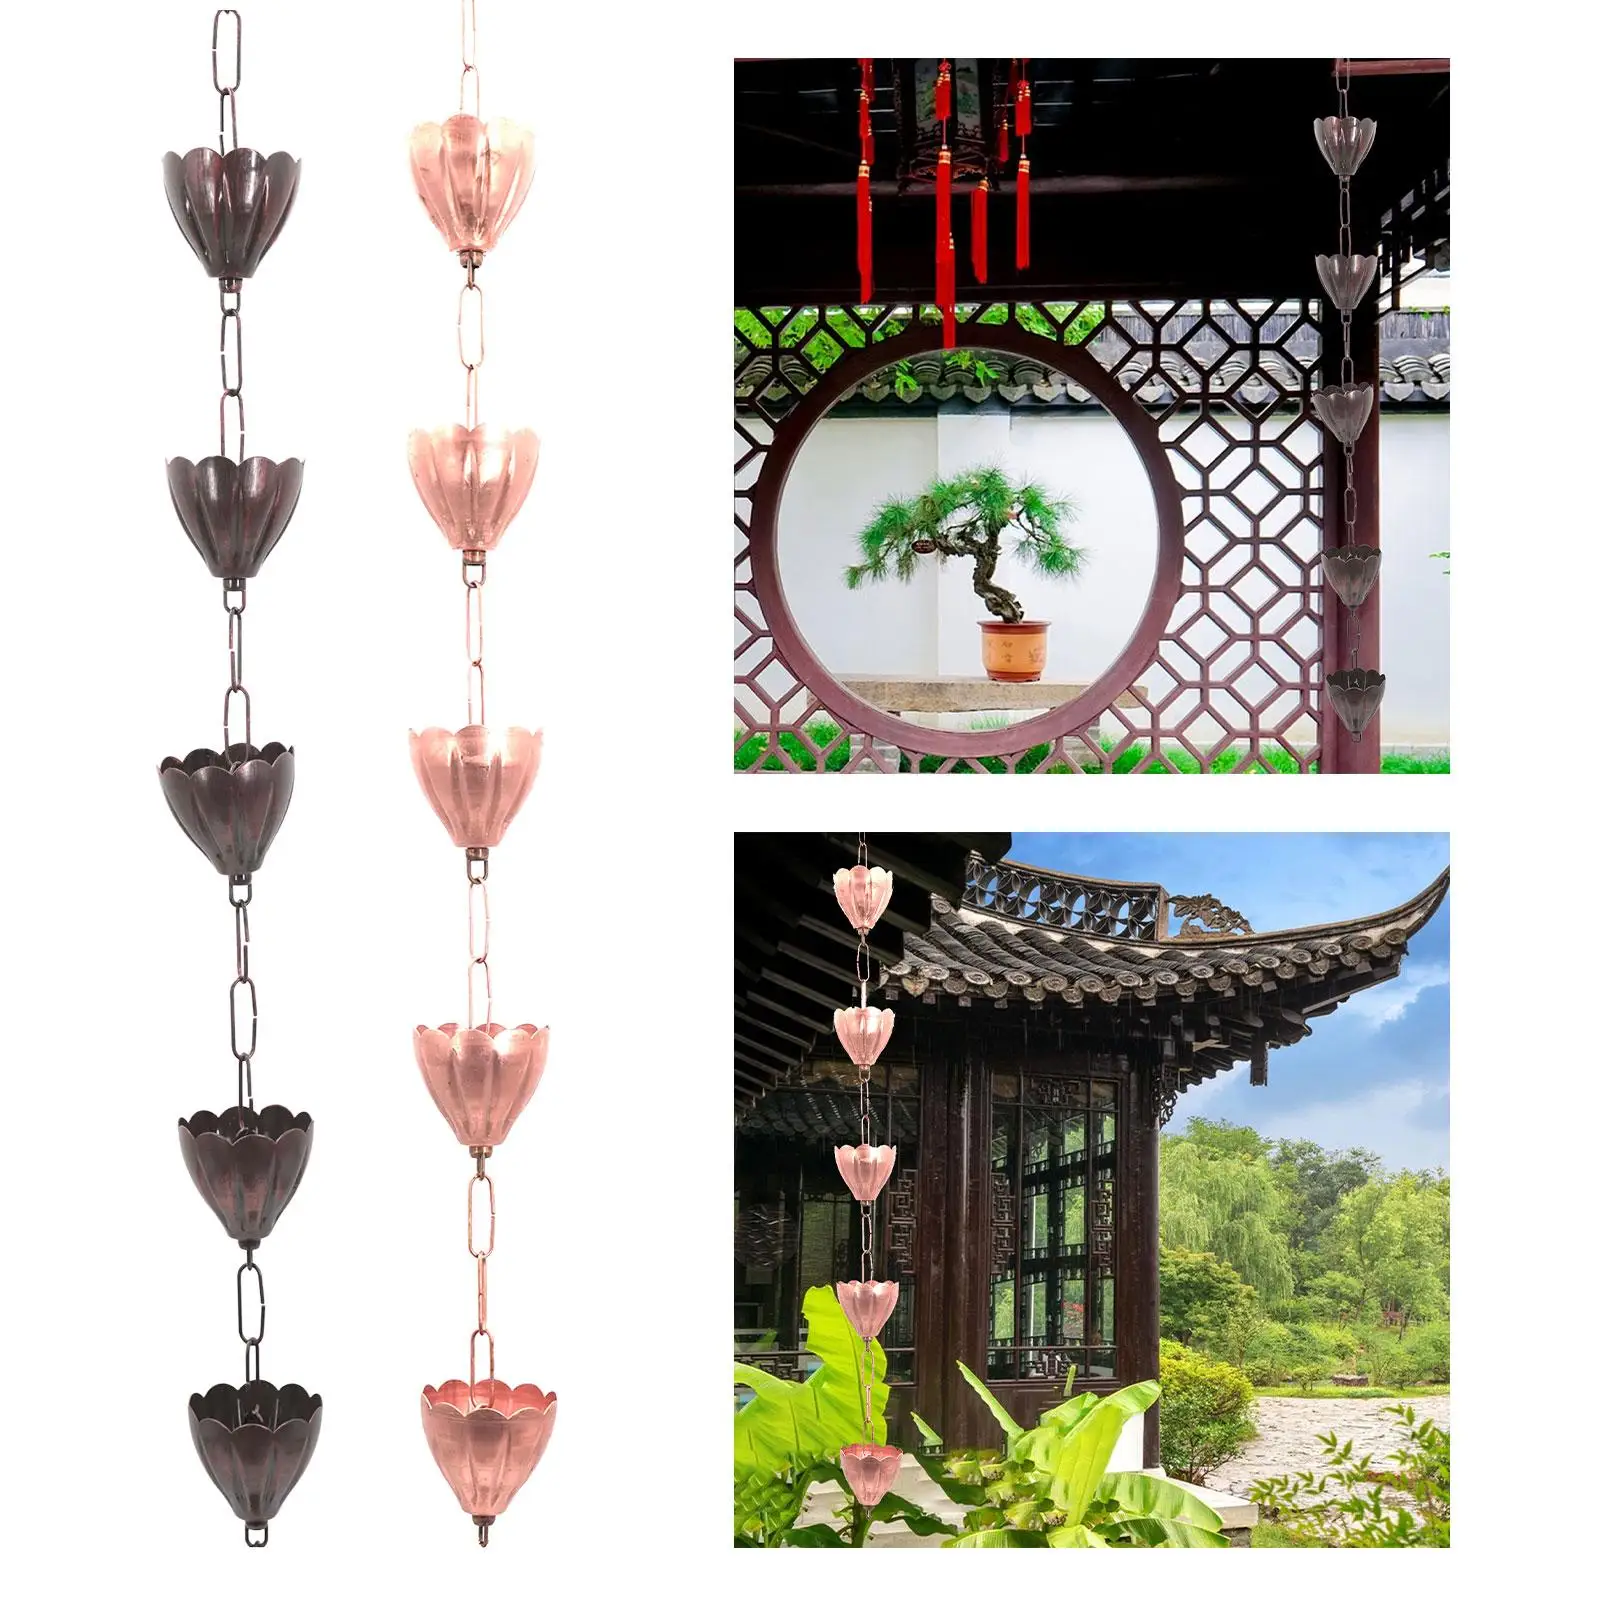 Rain Chains Rain Chain Cups Functional for Gutters with Adapter Display Metal Rain Chain for Roofs Awnings Outdoor Gazebos Home